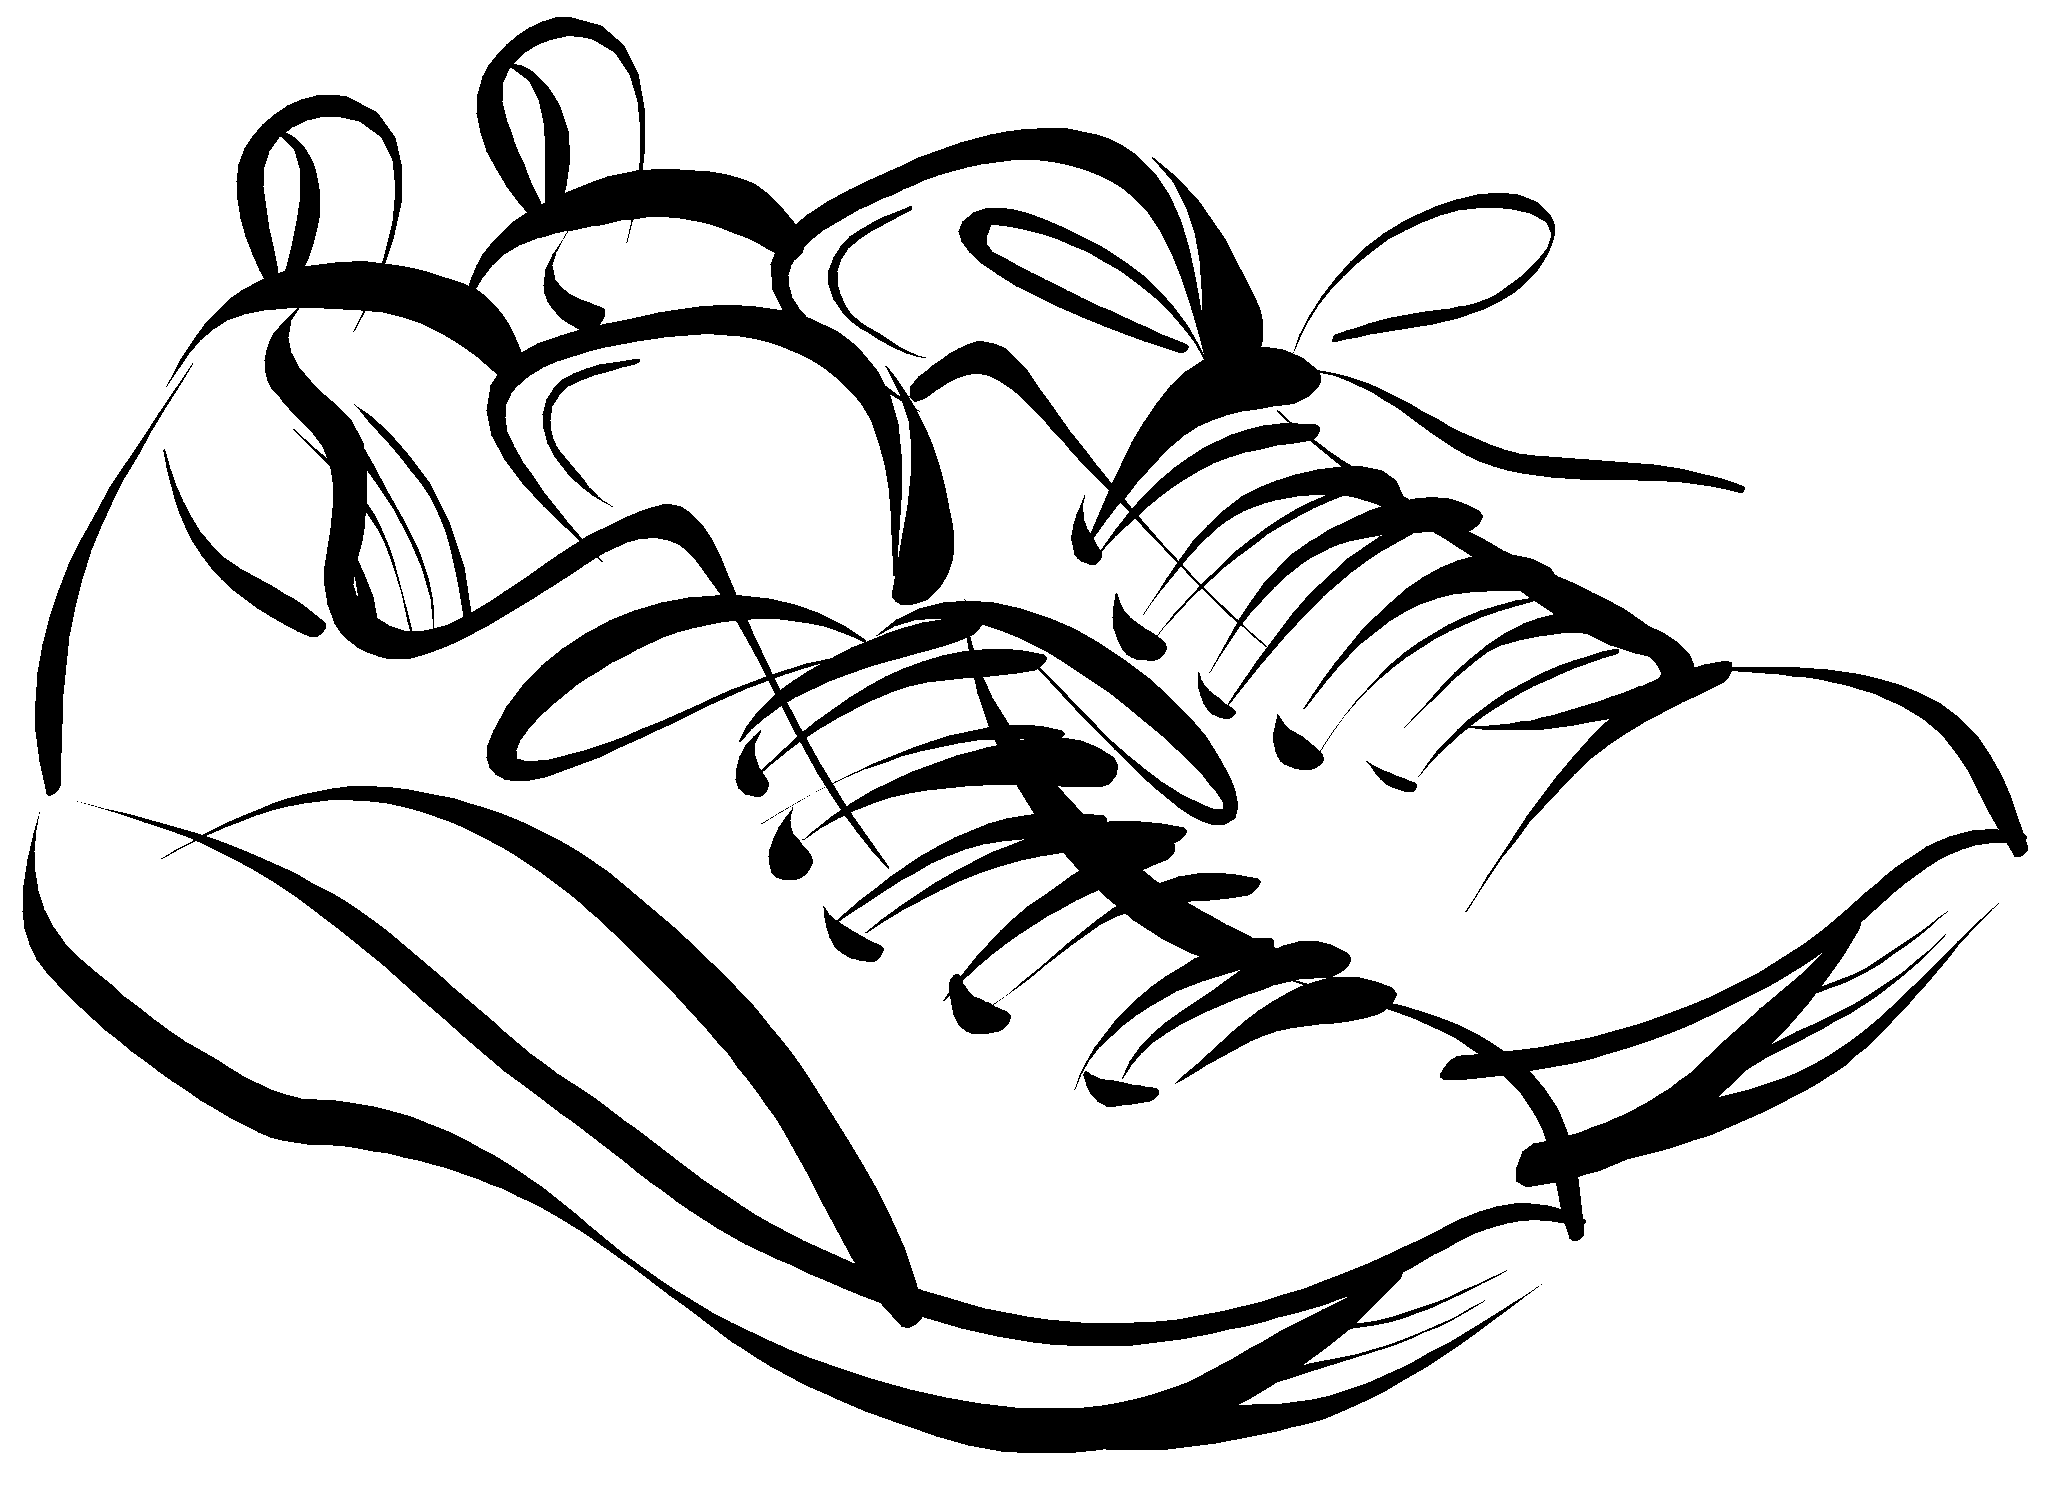 Track shoe running shoes clipart